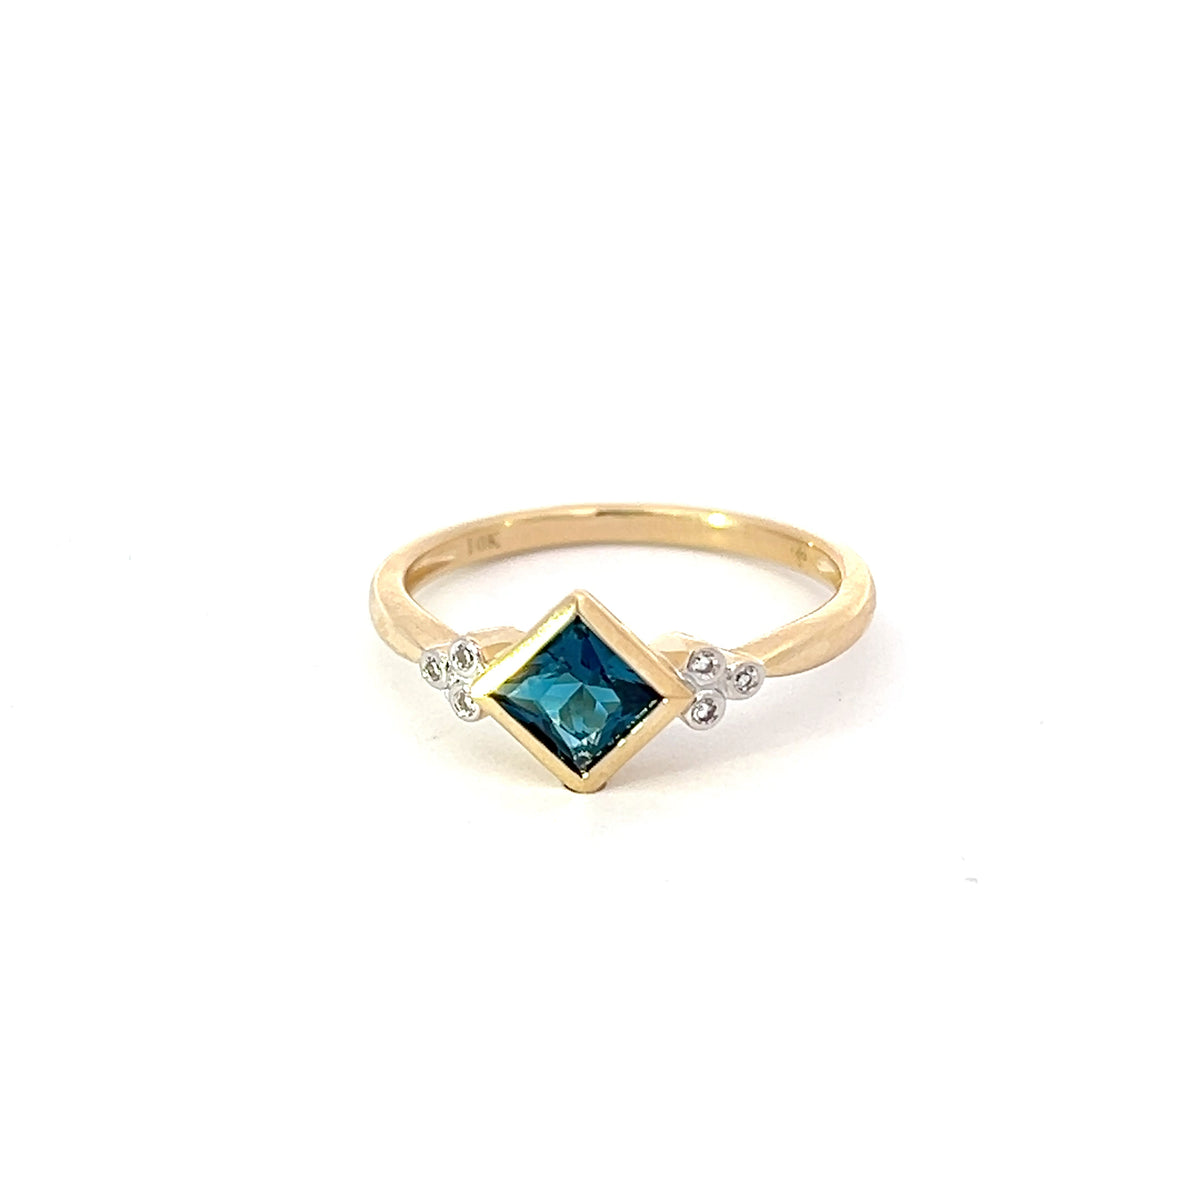 10K Yellow Gold London Blue Topaz and Diamond Ring, size 7